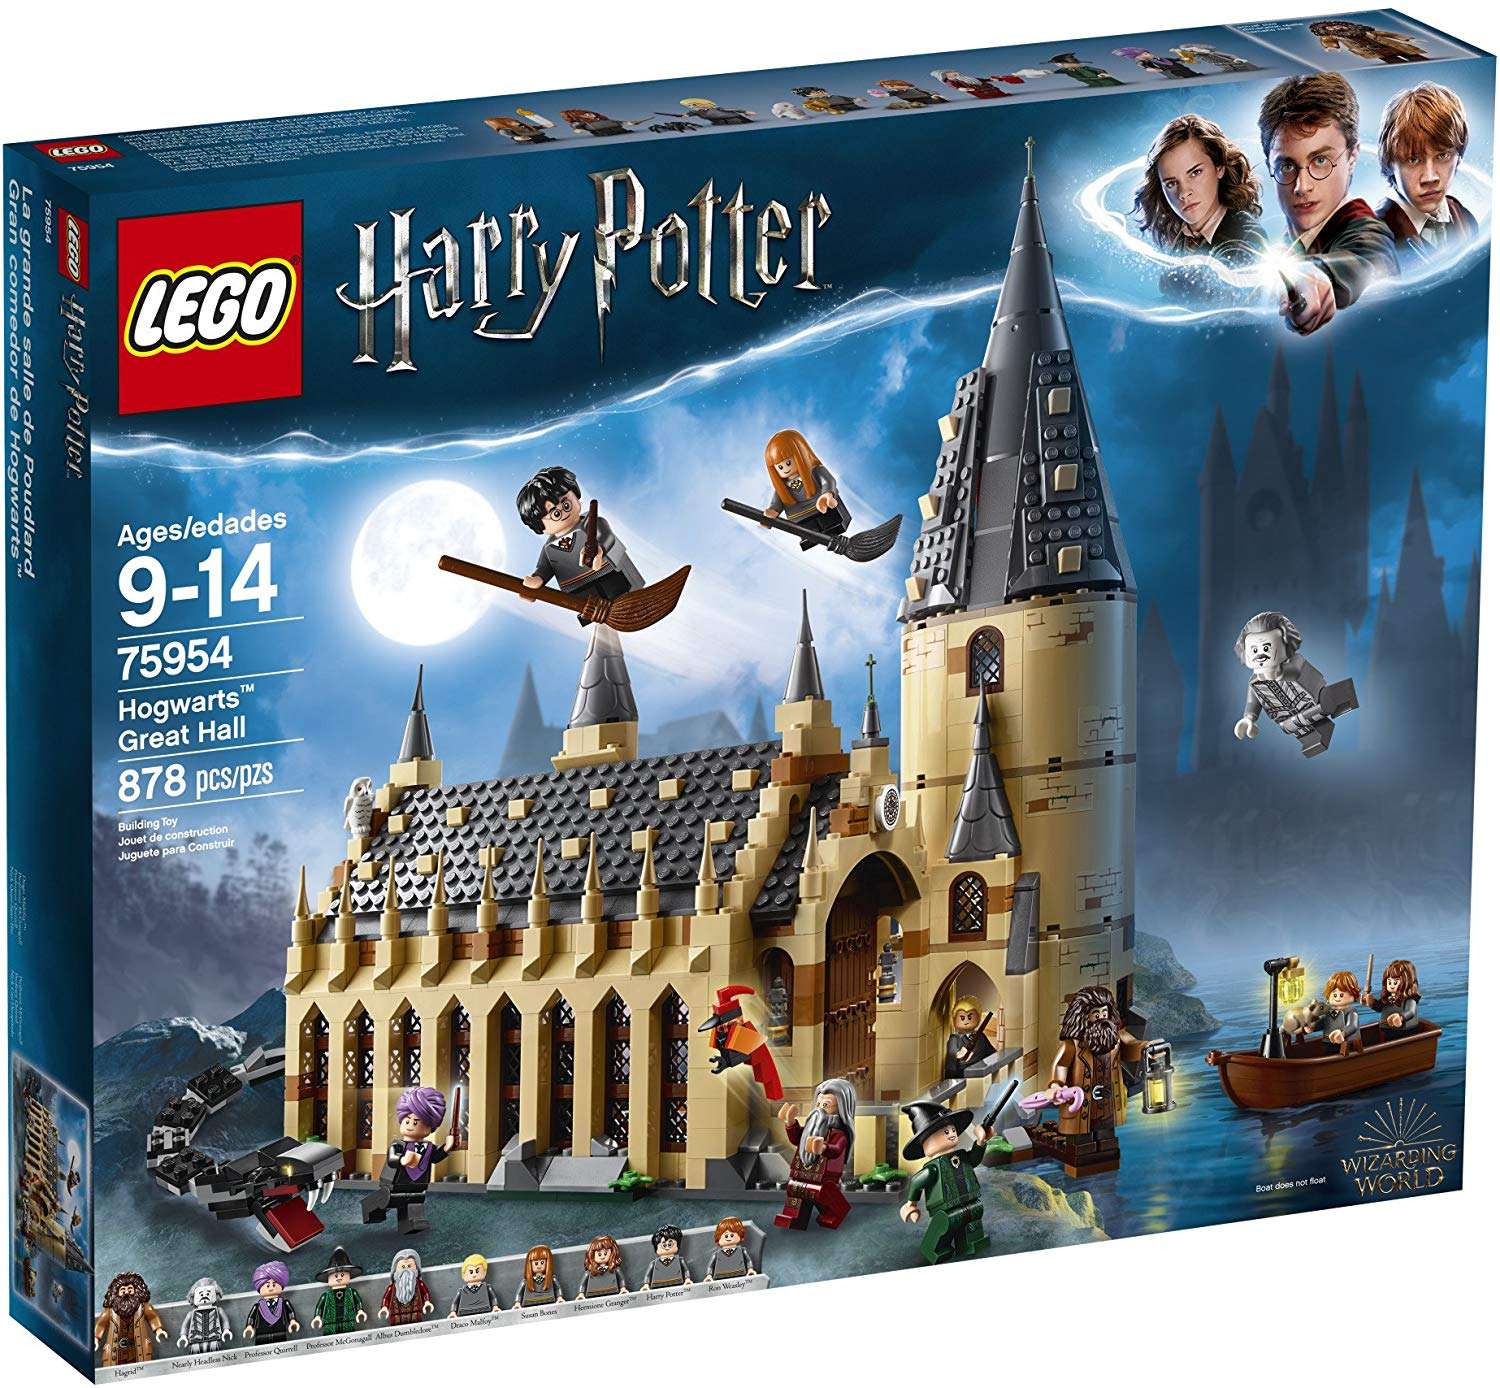 LEGO Harry Potter Sets Seeing 20% Off Discount